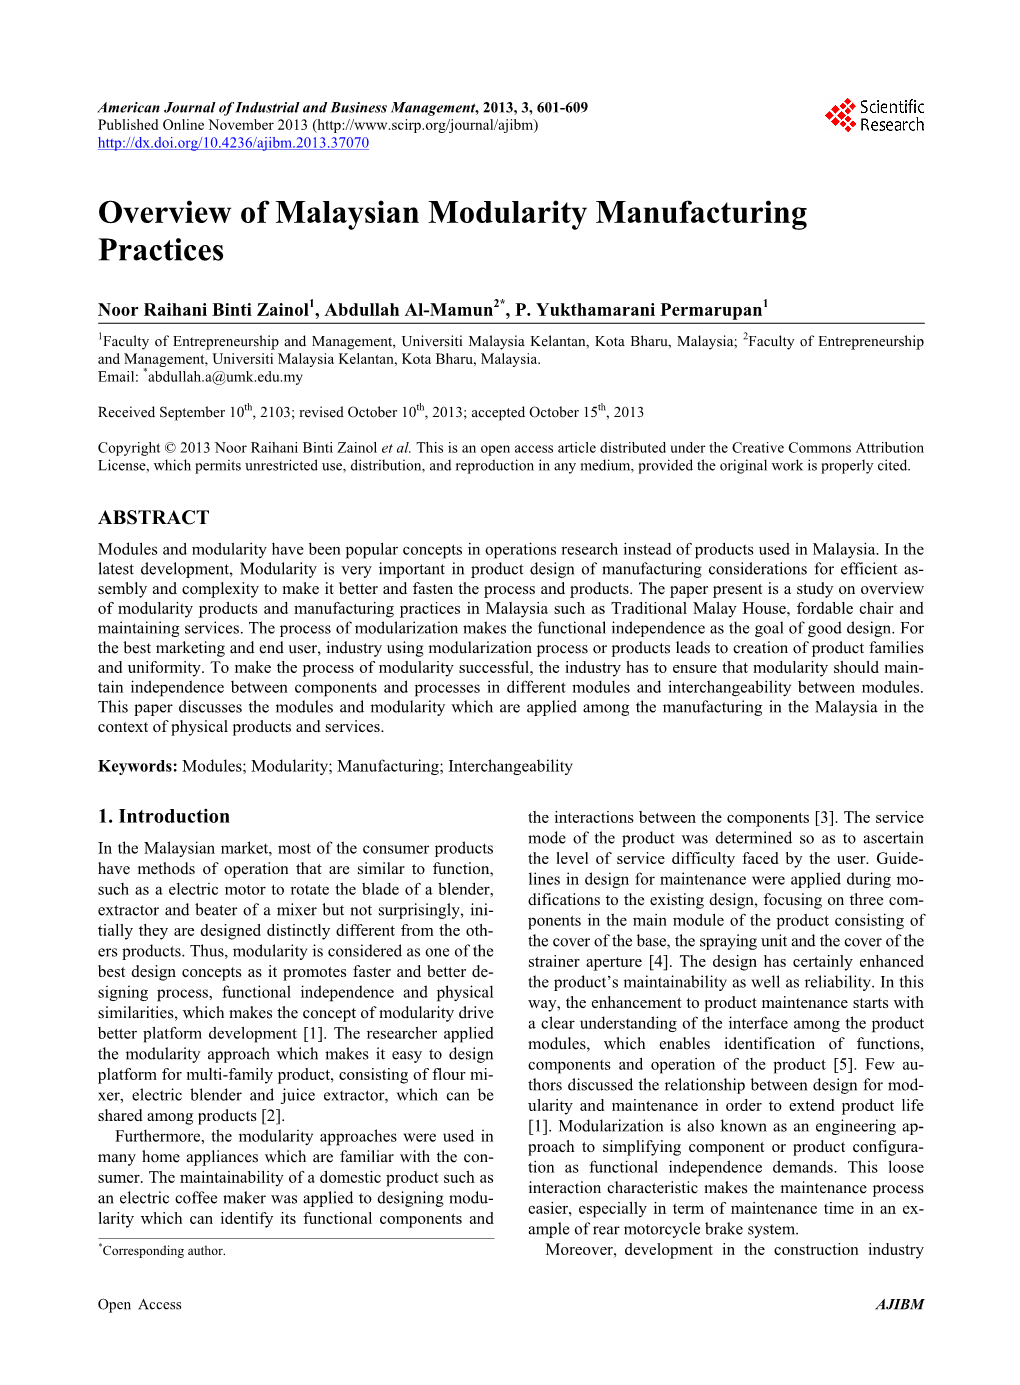 Overview of Malaysian Modularity Manufacturing Practices